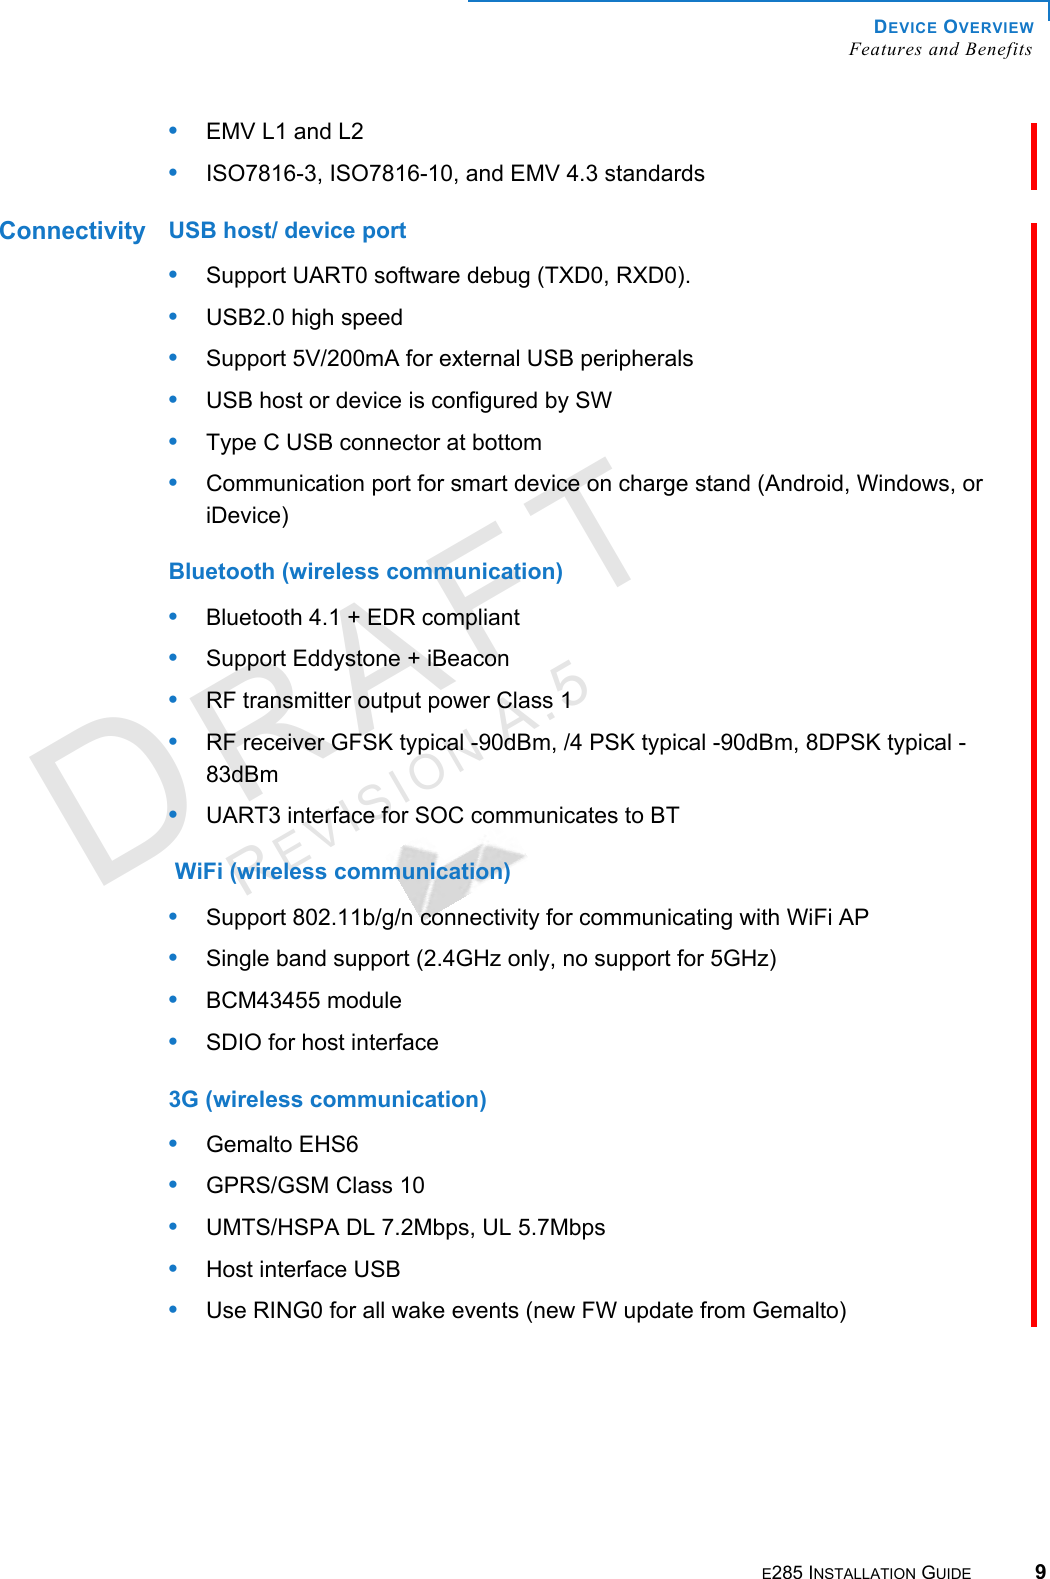 DEVICE OVERVIEW Features and BenefitsE285 INSTALLATION GUIDE 9DRAFTREVISION A.5 •EMV L1 and L2•ISO7816-3, ISO7816-10, and EMV 4.3 standardsConnectivity USB host/ device port•Support UART0 software debug (TXD0, RXD0).•USB2.0 high speed•Support 5V/200mA for external USB peripherals•USB host or device is configured by SW•Type C USB connector at bottom•Communication port for smart device on charge stand (Android, Windows, or iDevice)Bluetooth (wireless communication)•Bluetooth 4.1 + EDR compliant•Support Eddystone + iBeacon•RF transmitter output power Class 1•RF receiver GFSK typical -90dBm, /4 PSK typical -90dBm, 8DPSK typical -83dBm•UART3 interface for SOC communicates to BT WiFi (wireless communication)•Support 802.11b/g/n connectivity for communicating with WiFi AP•Single band support (2.4GHz only, no support for 5GHz)•BCM43455 module•SDIO for host interface3G (wireless communication)•Gemalto EHS6•GPRS/GSM Class 10•UMTS/HSPA DL 7.2Mbps, UL 5.7Mbps•Host interface USB•Use RING0 for all wake events (new FW update from Gemalto)